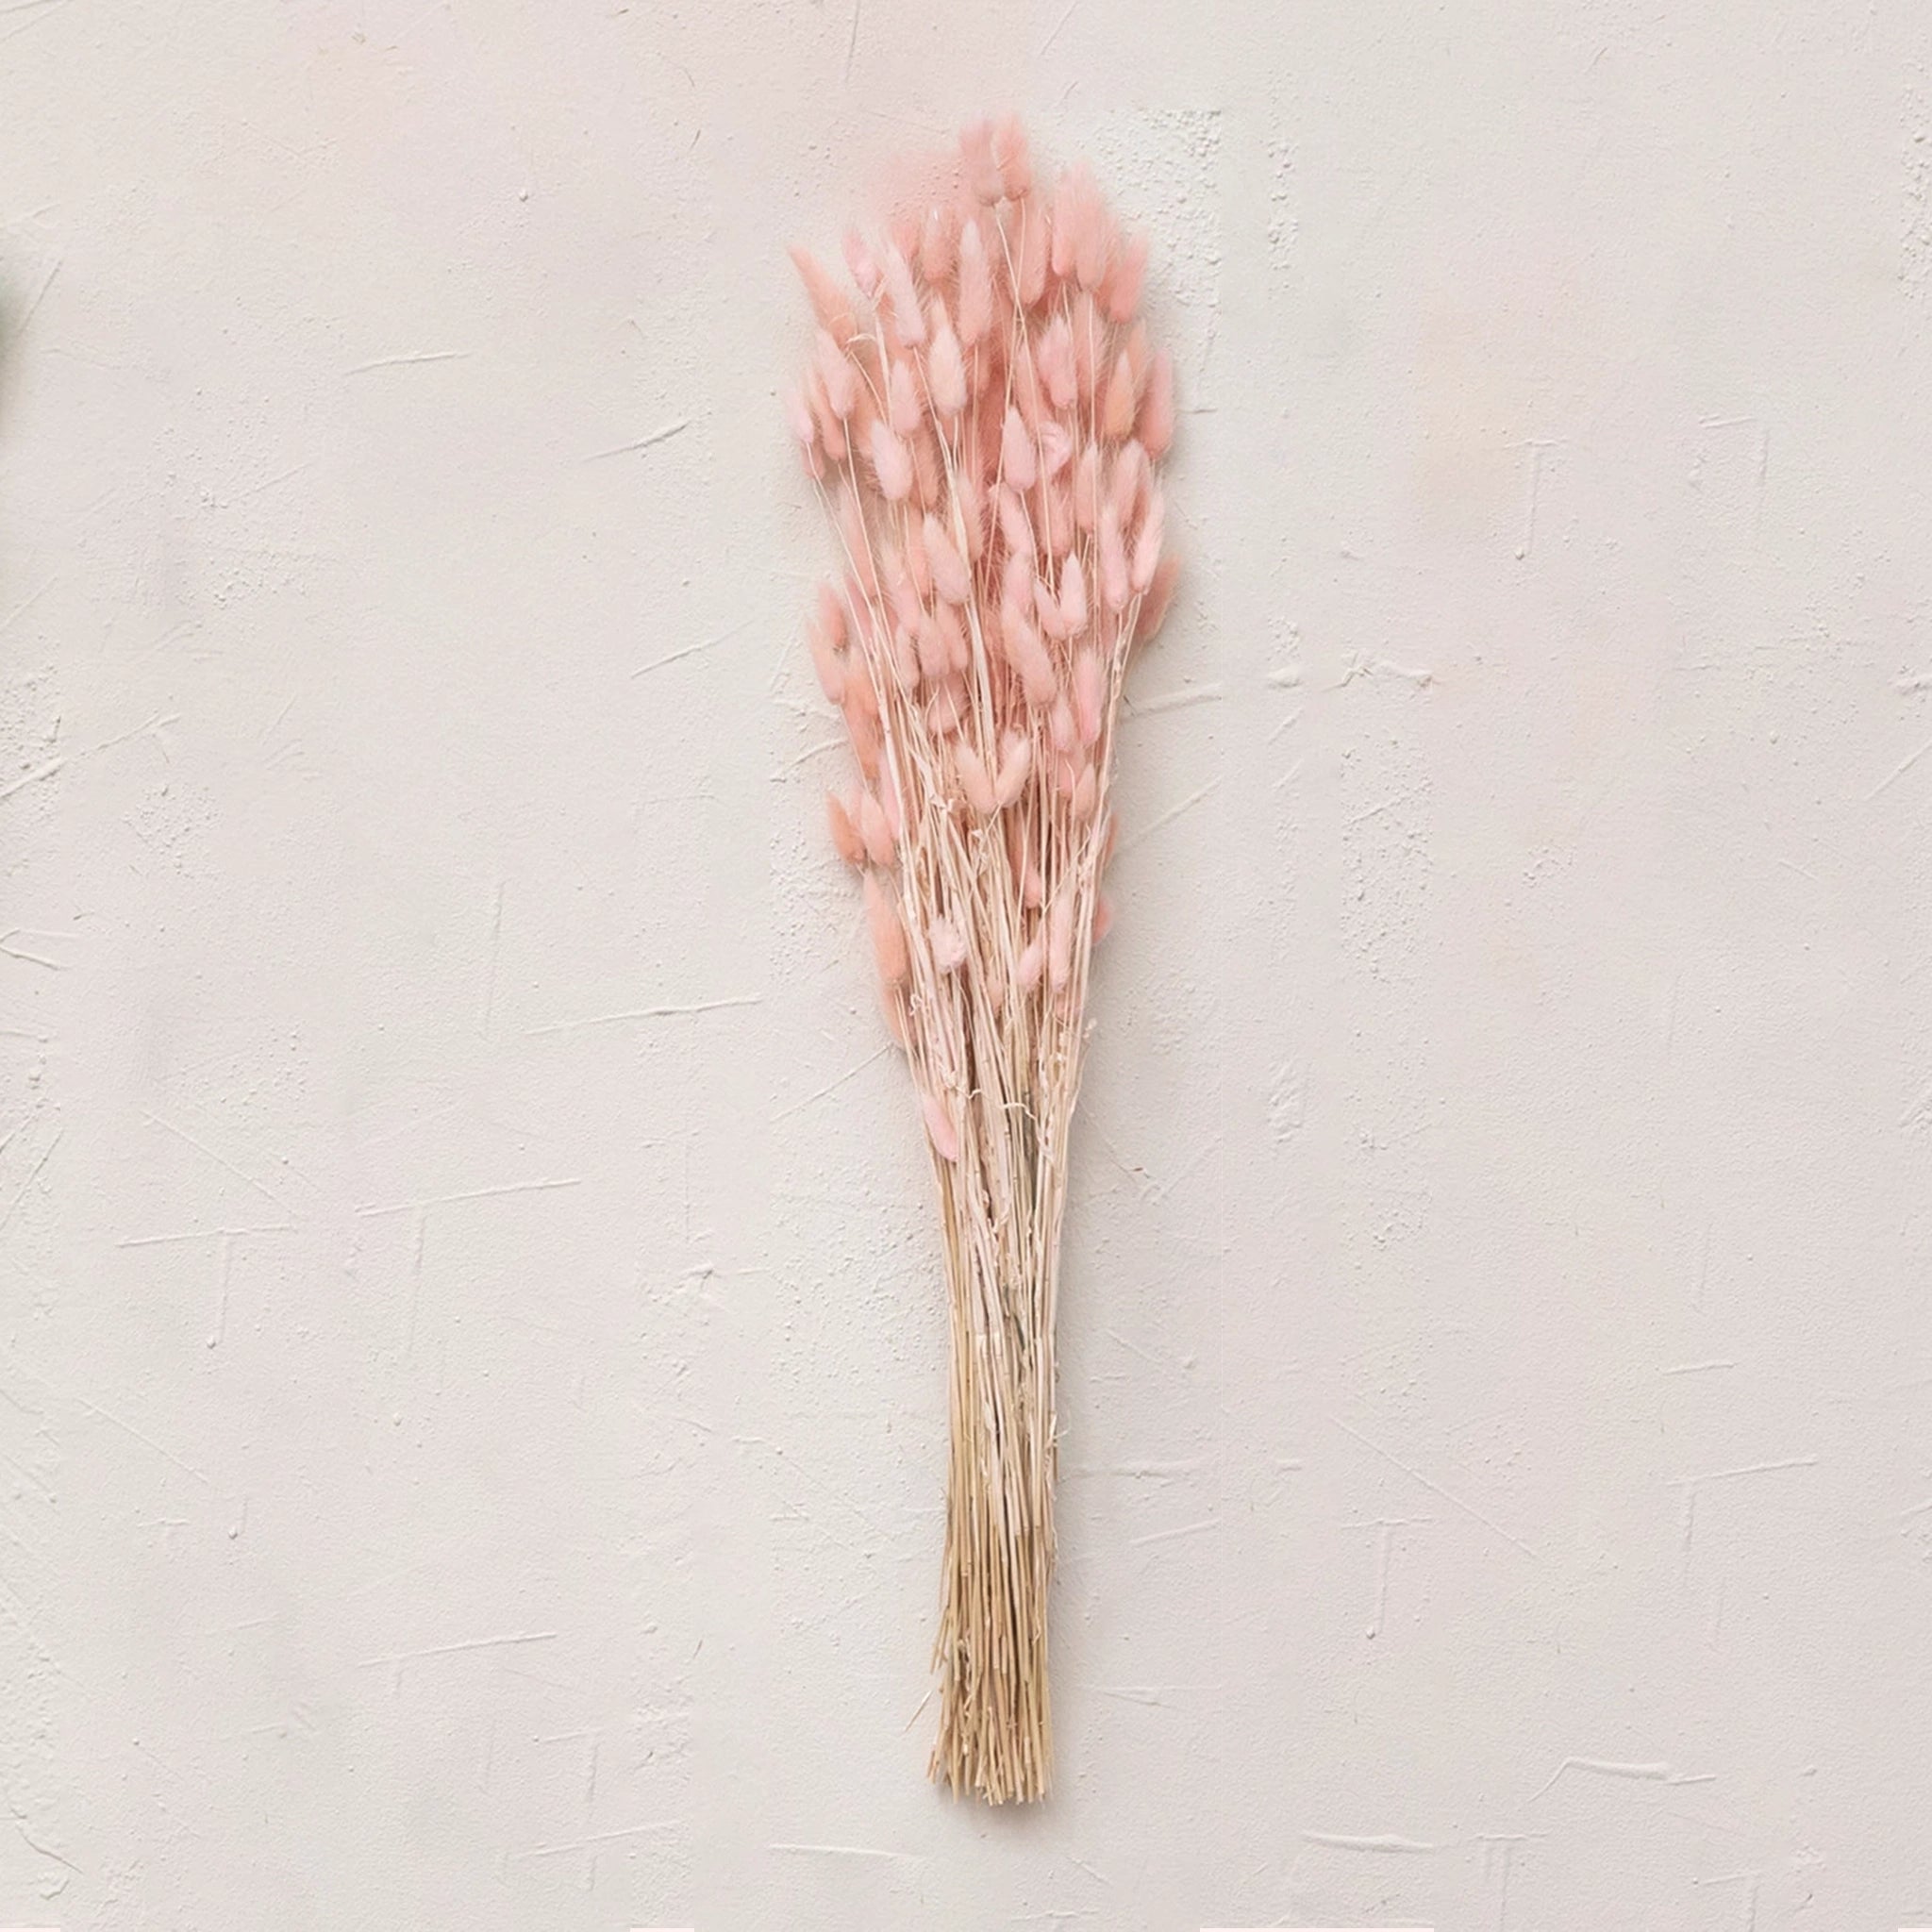 A bundle of light pink dried bunny tail with long stems.